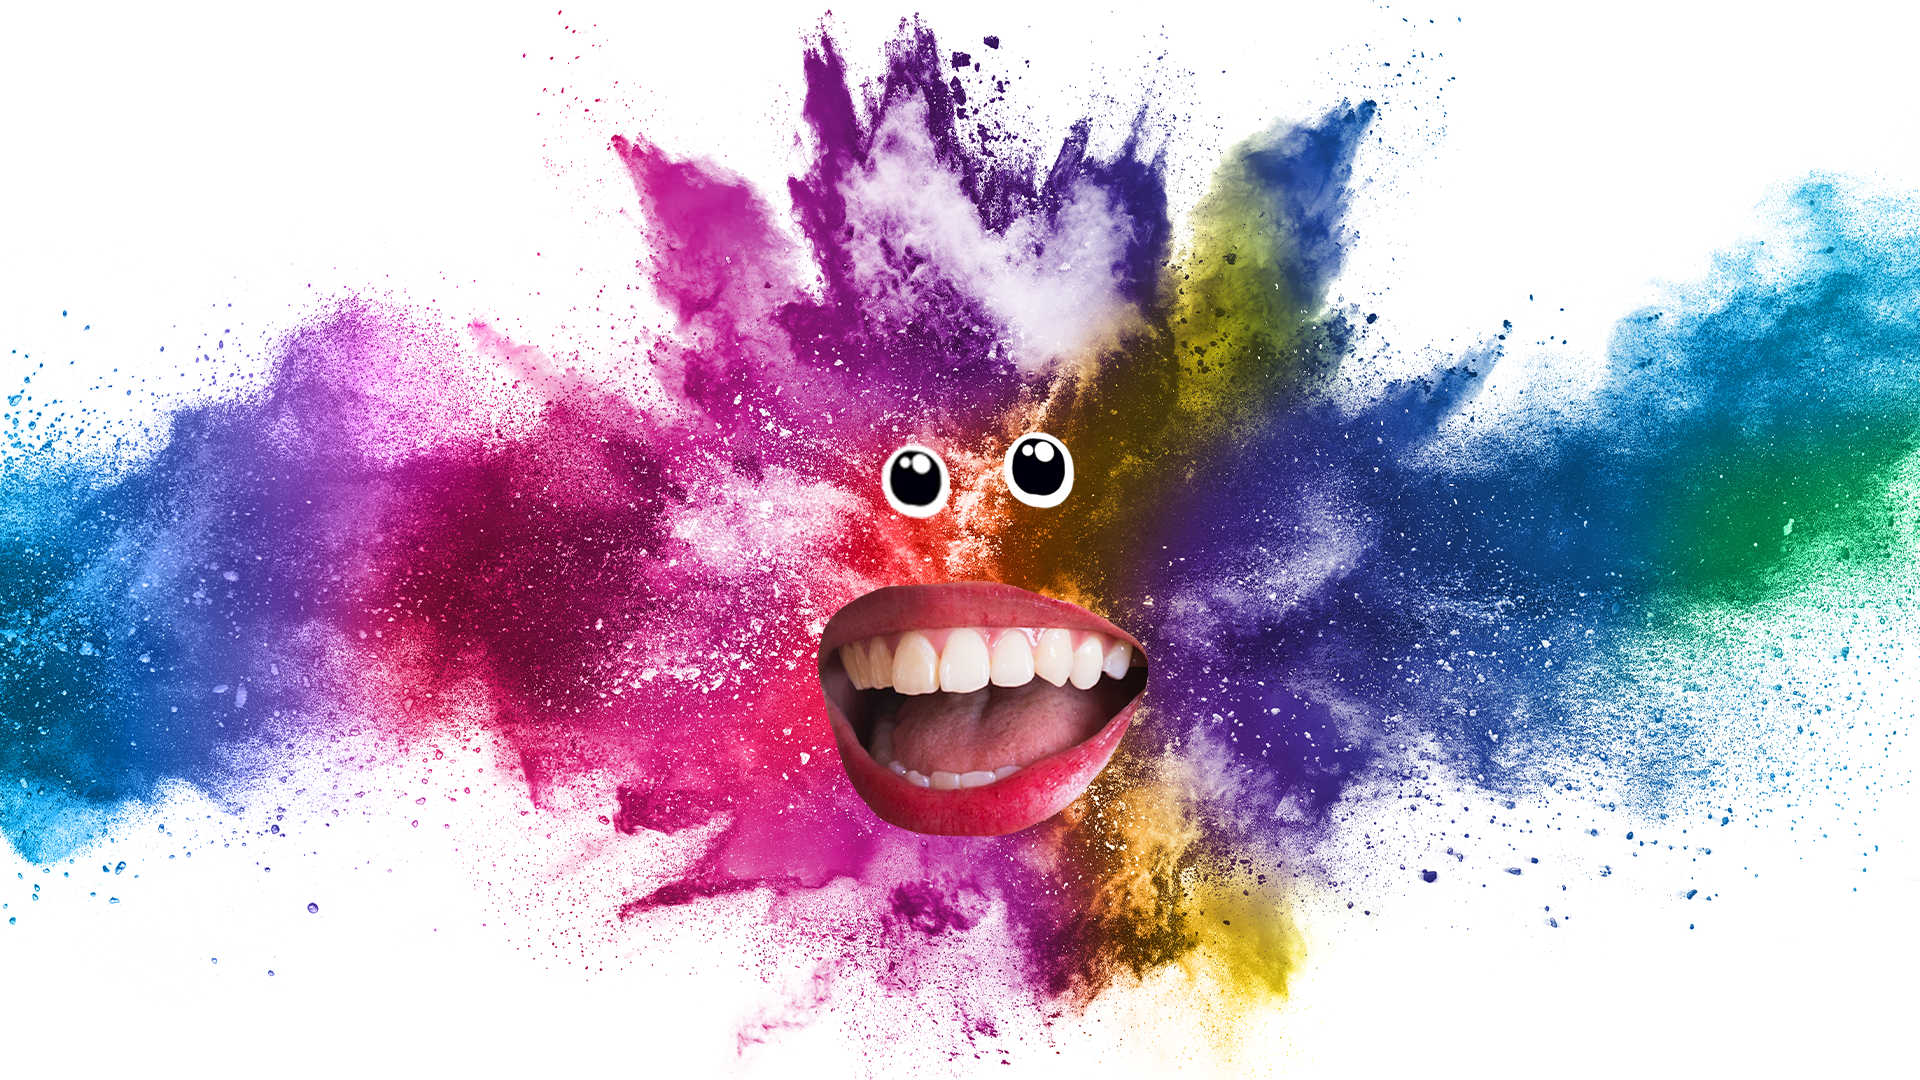 Colour burst with eyes and mouth